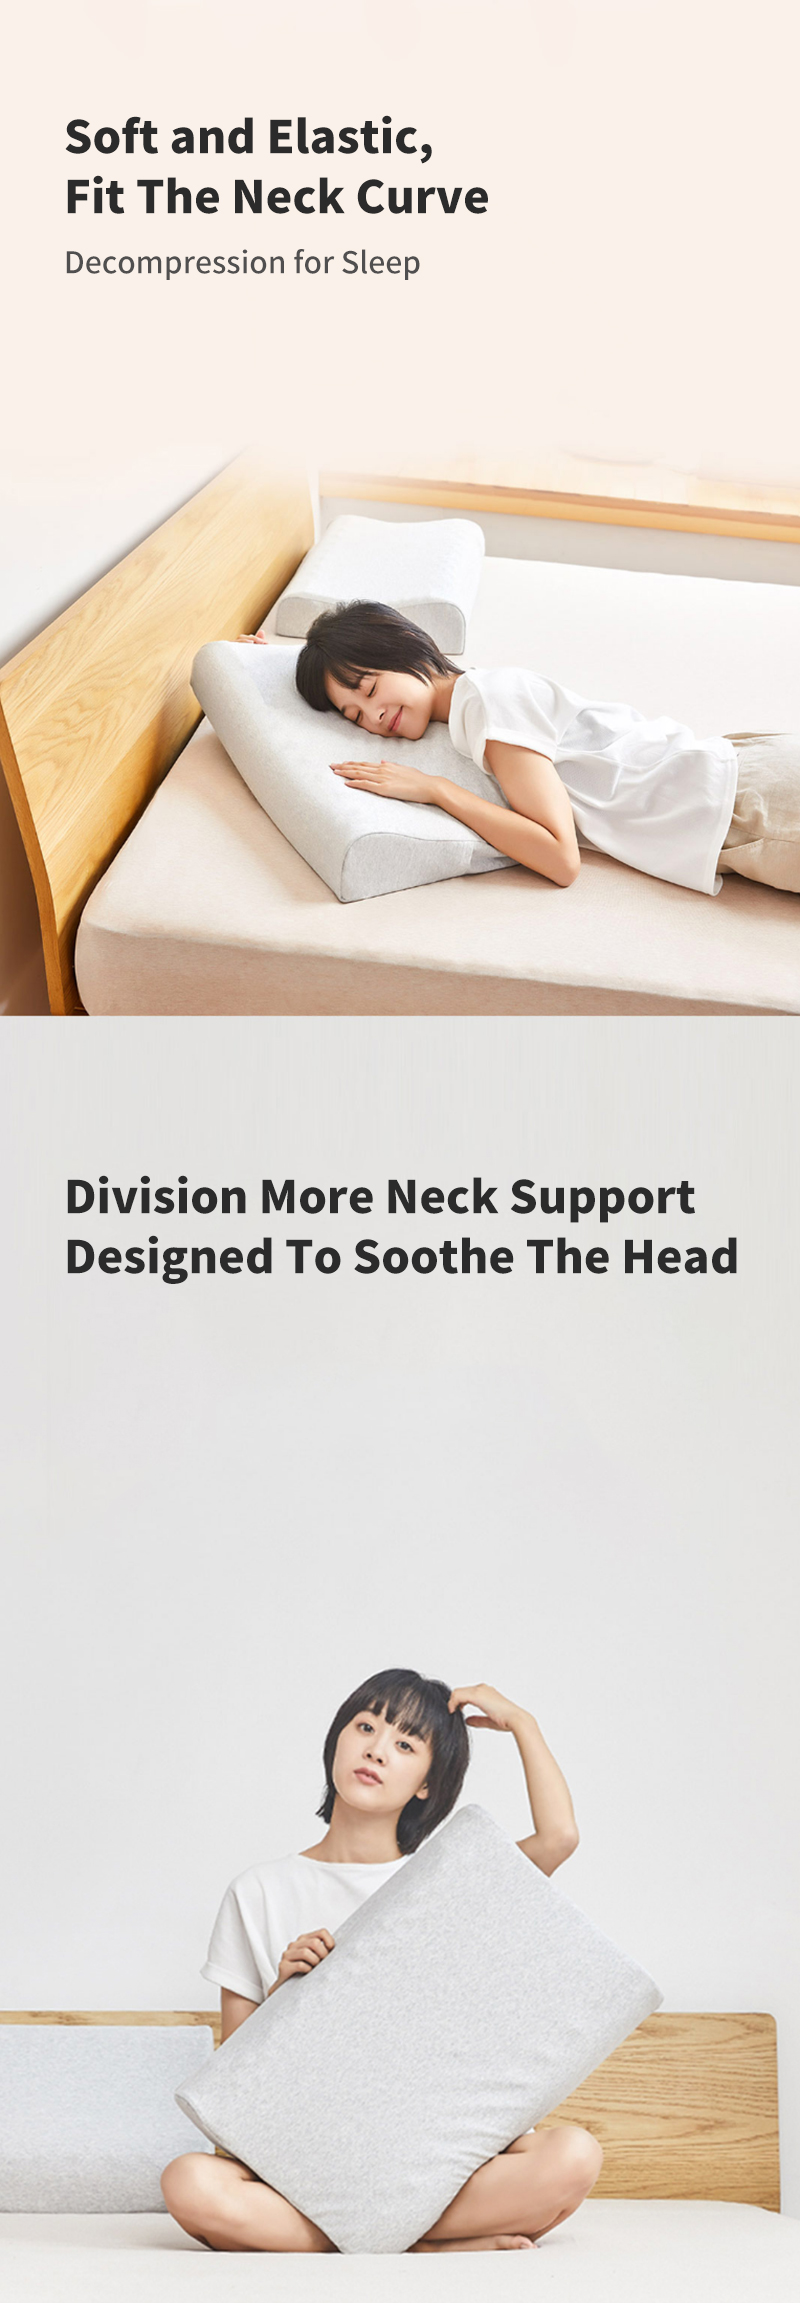 XIAOMI MIJIA Natural Latex Neck Pillow Three Curve Neck Guard Partitioned Particle Bulge Swedish Polygiene Antibacterial for Bedroom 2